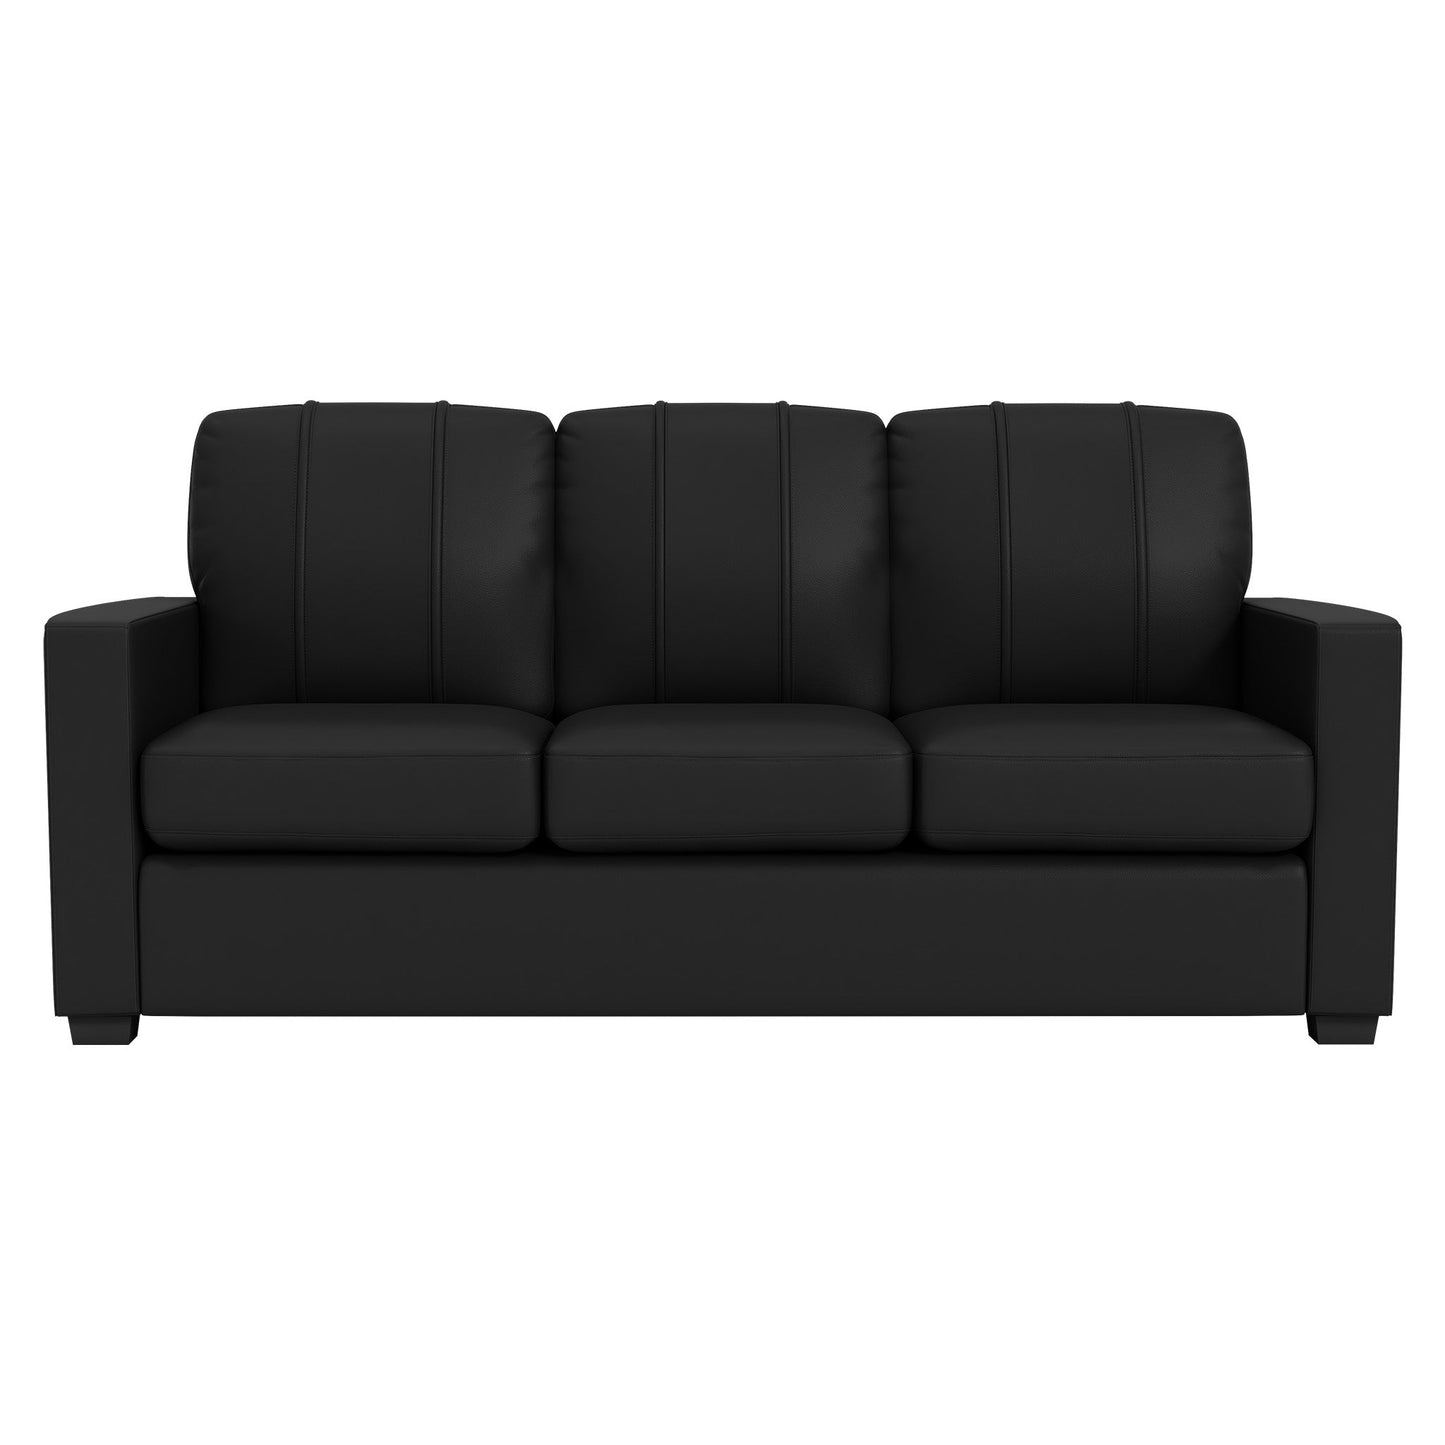 Silver Sofa with Charlotte Hornets Secondary